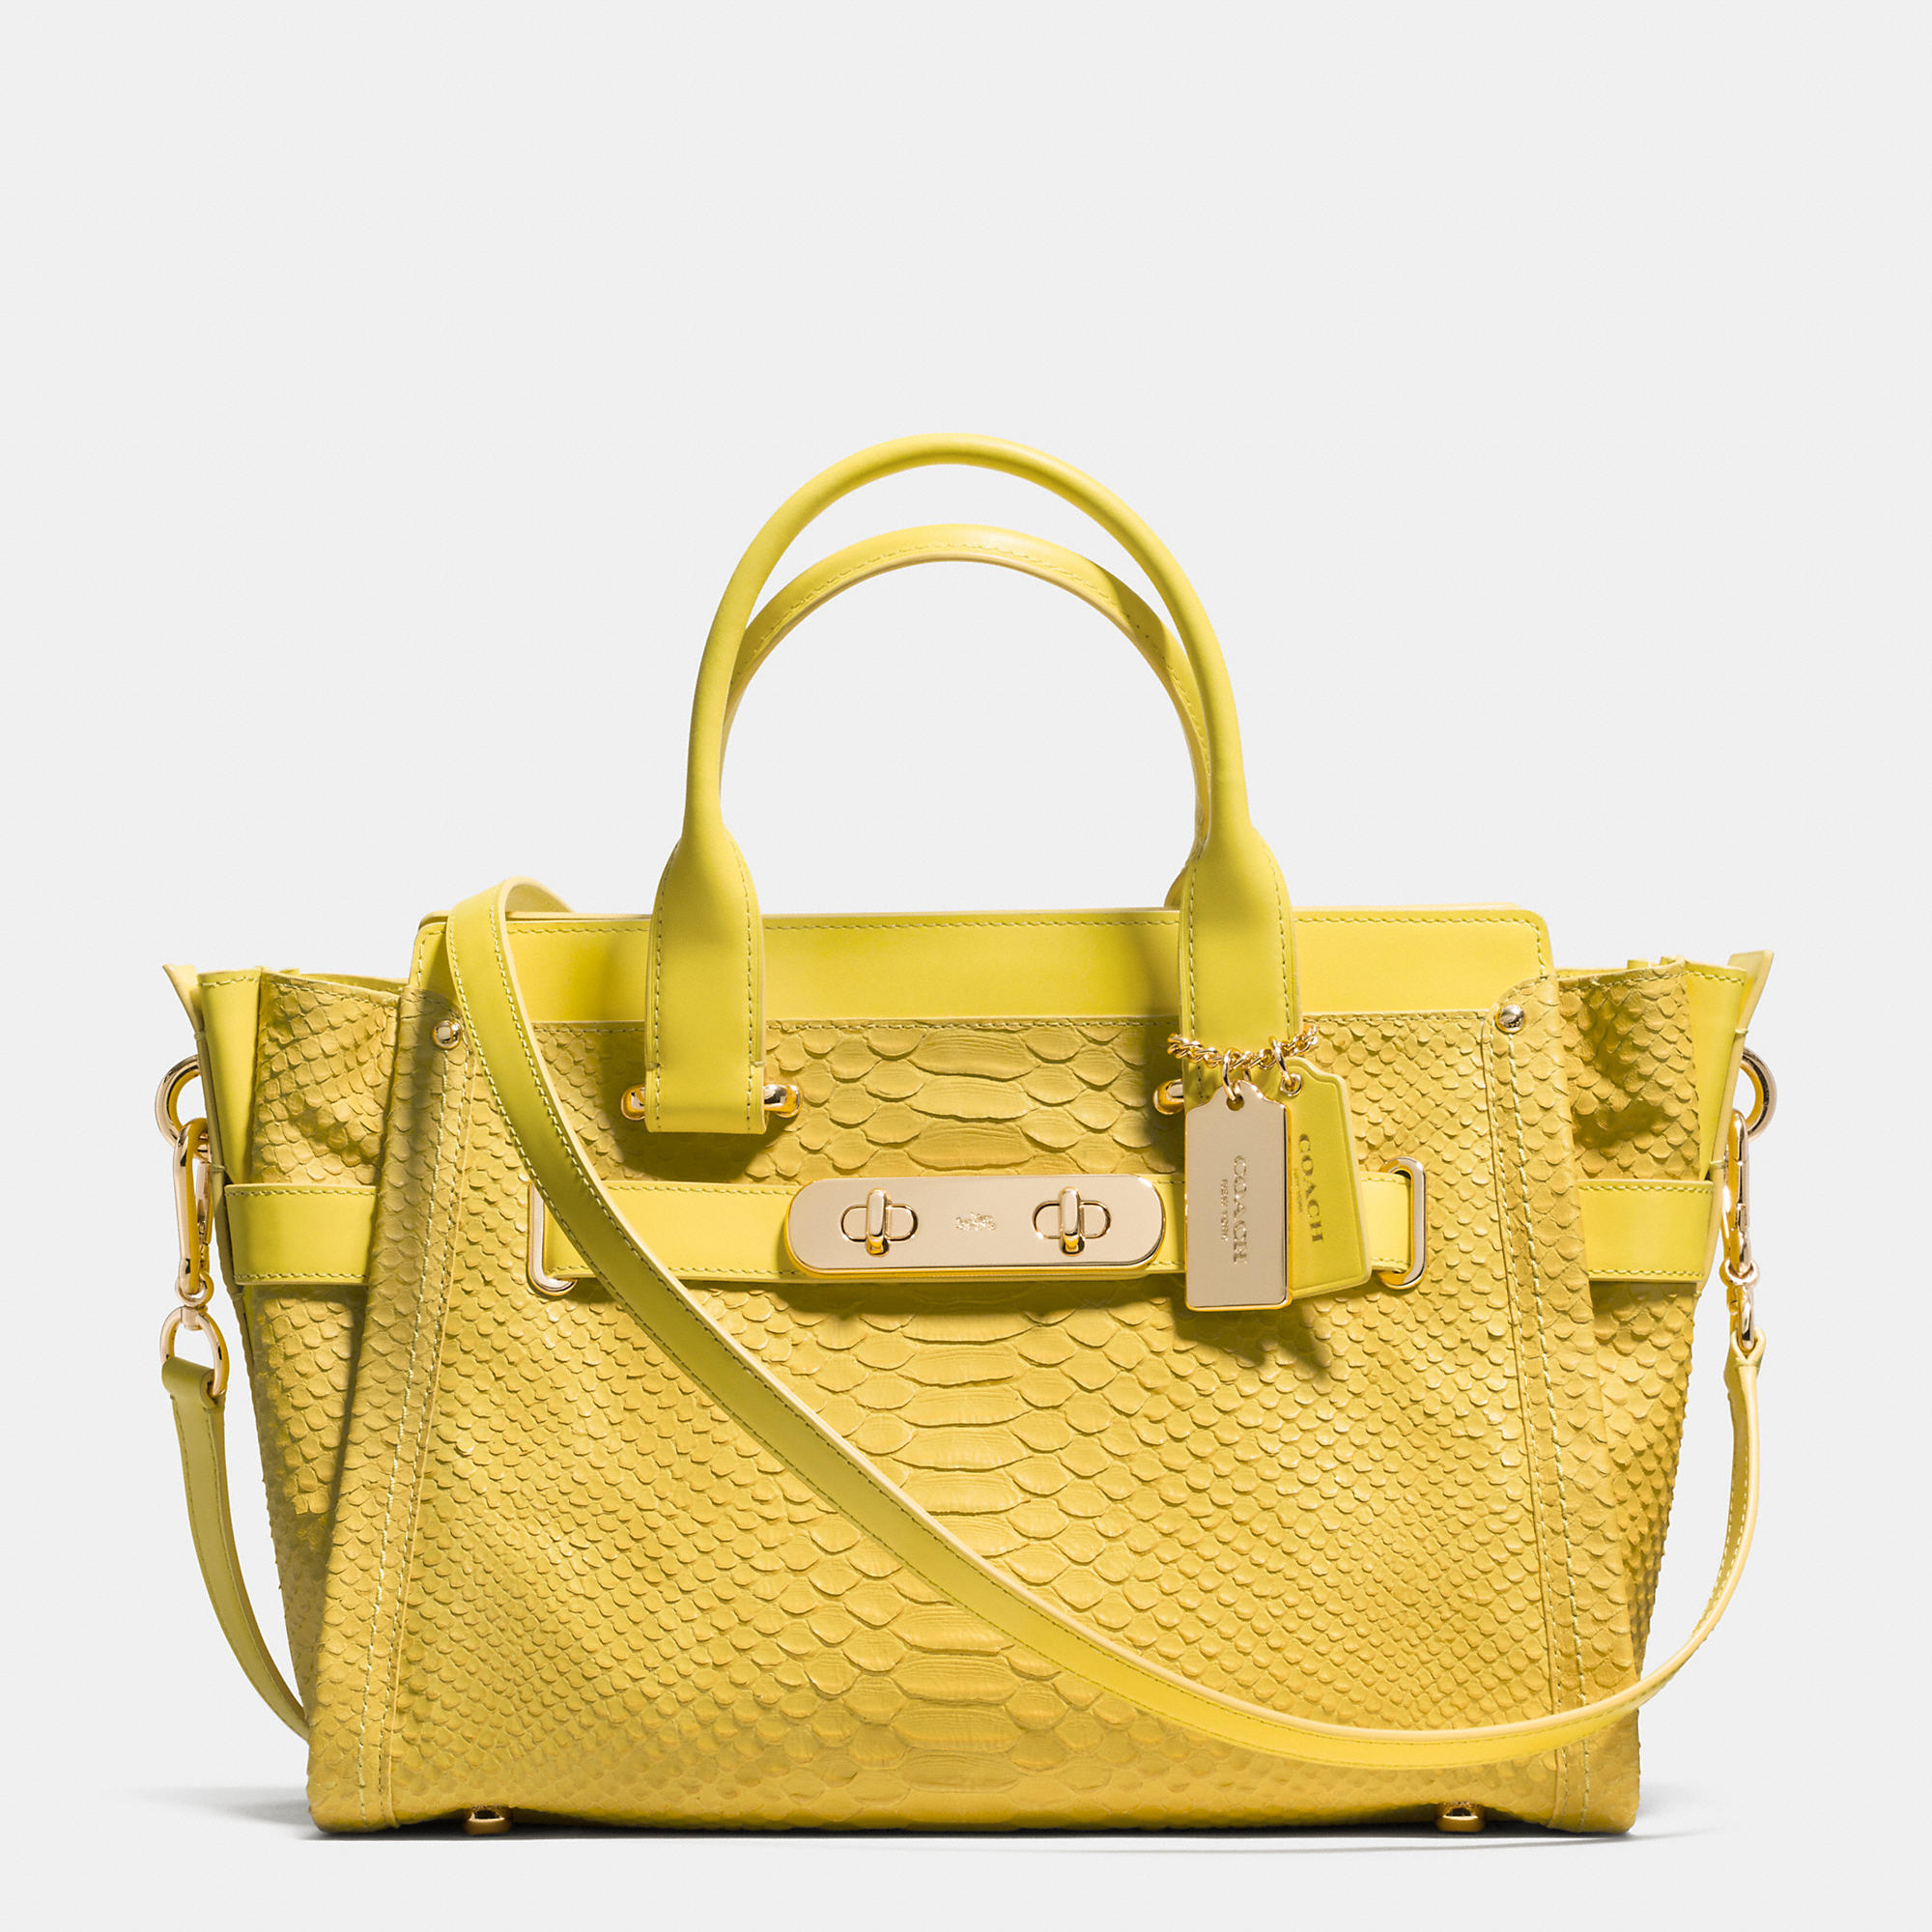 Lyst - Coach Swagger In Python Embossed Leather in Yellow